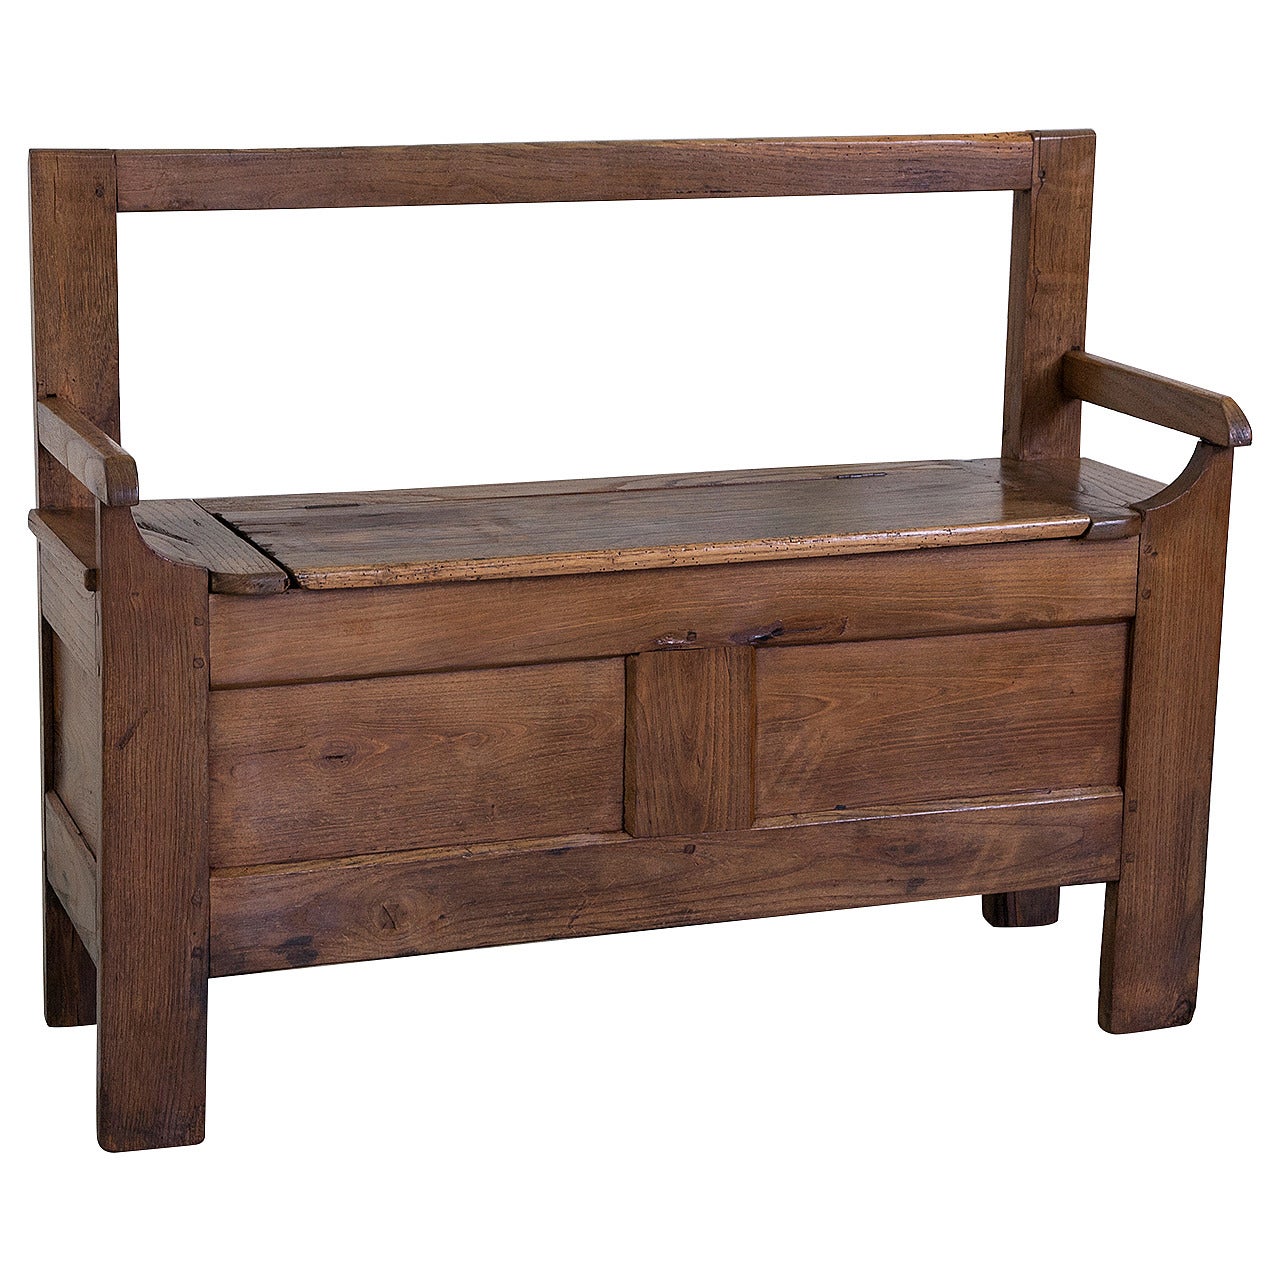 19th Century French Solid Oak Coffer Bench